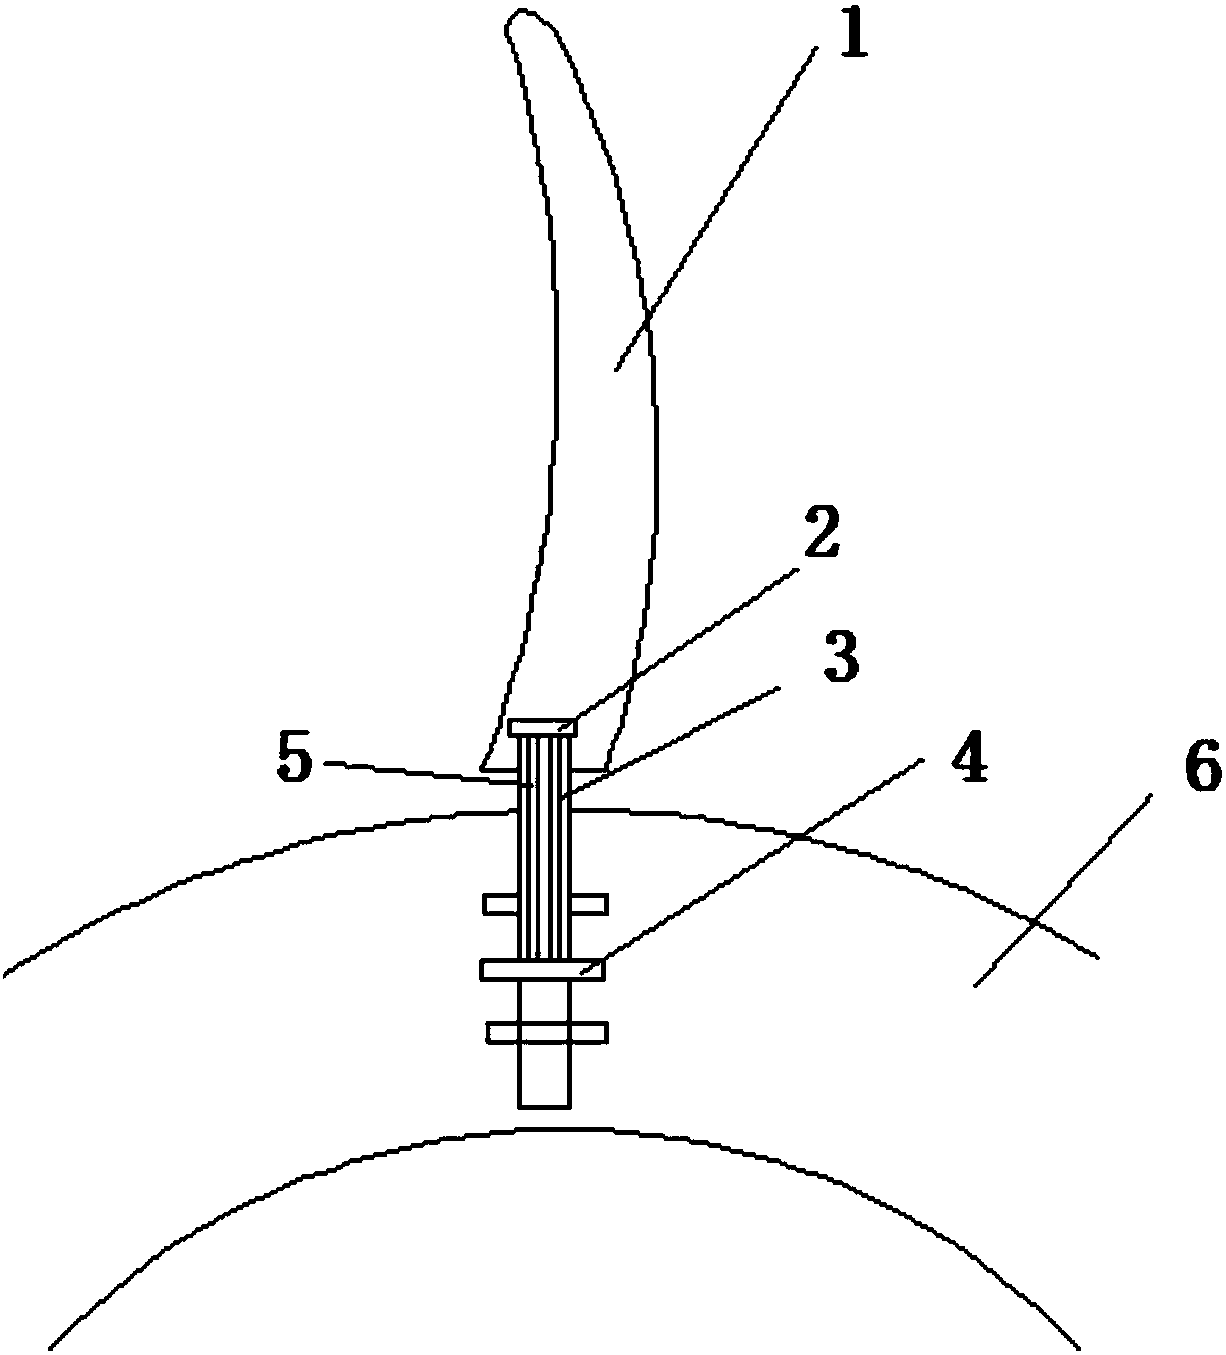 Fixing structure with blade radial size and rotating angle adjusting function